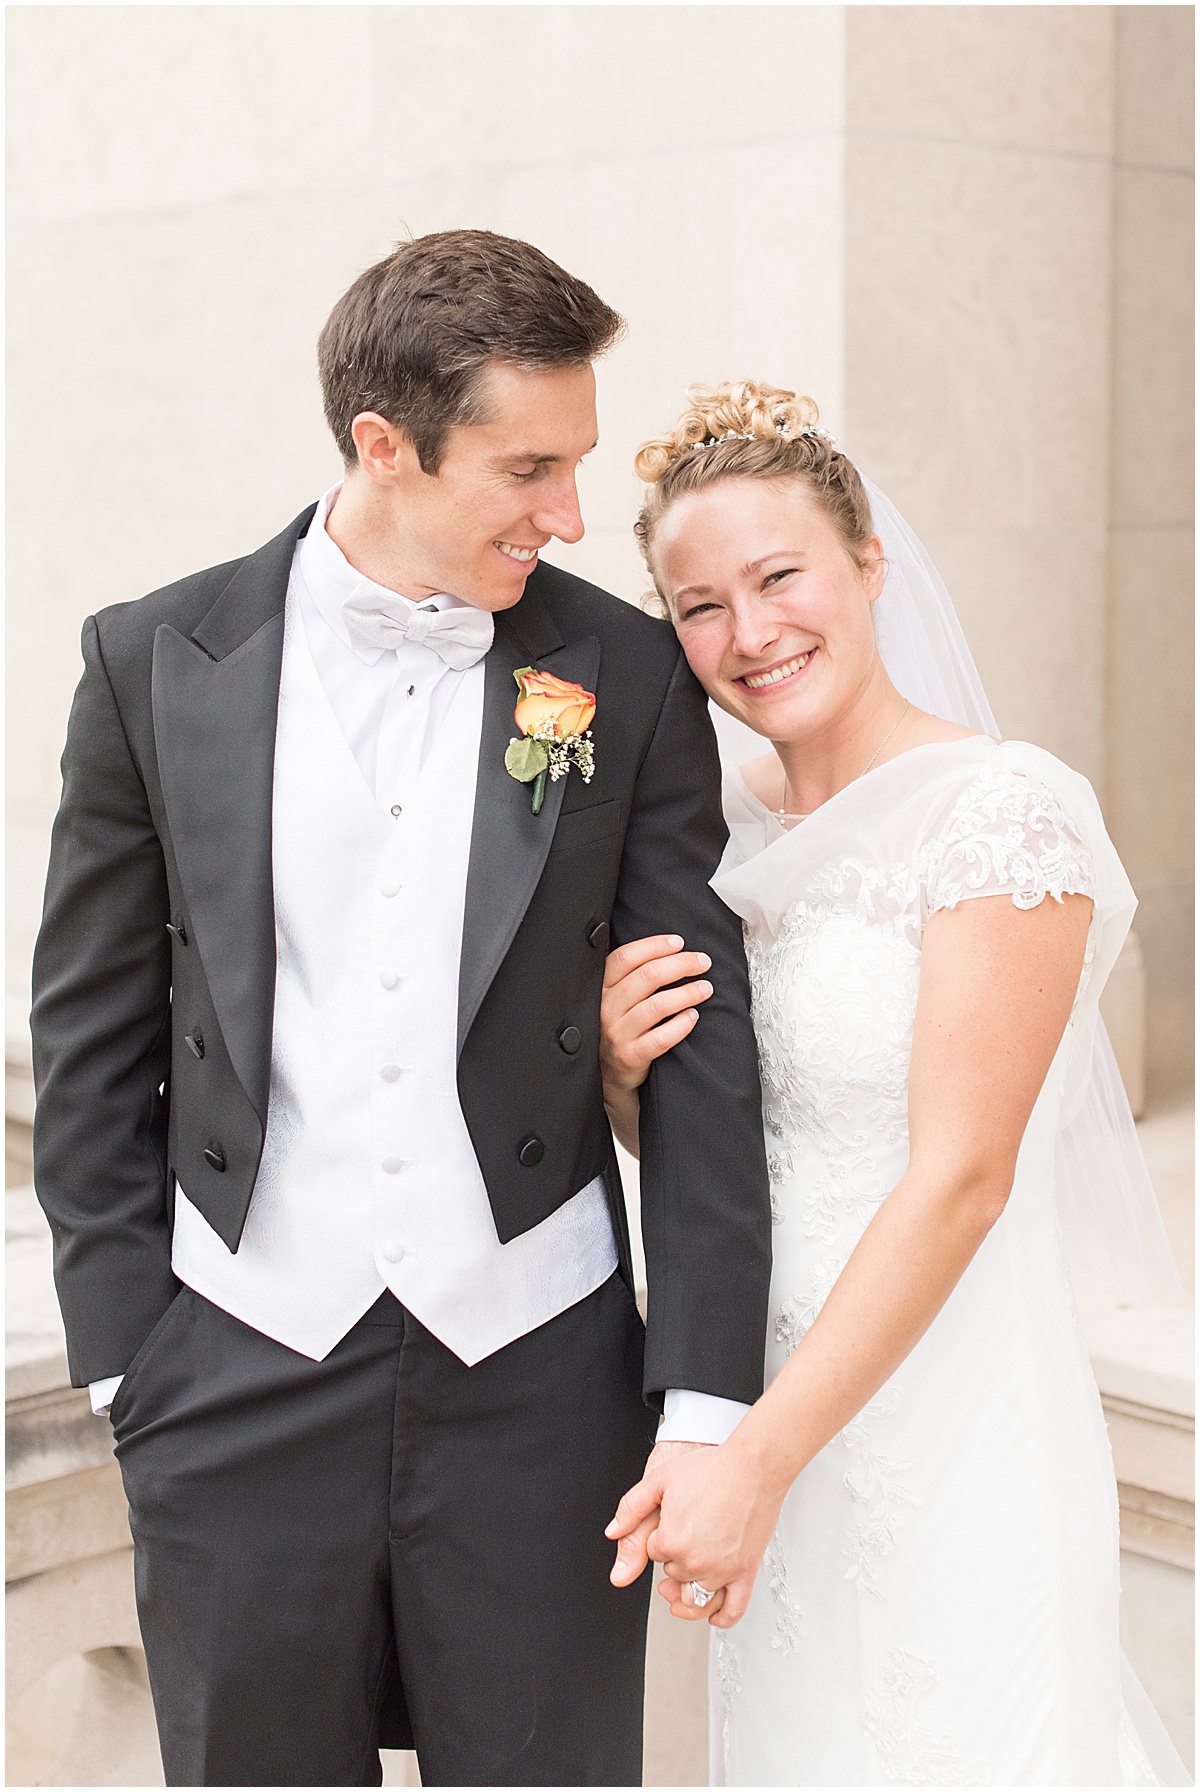 Wedding photos in downtown Lafayette, Indiana